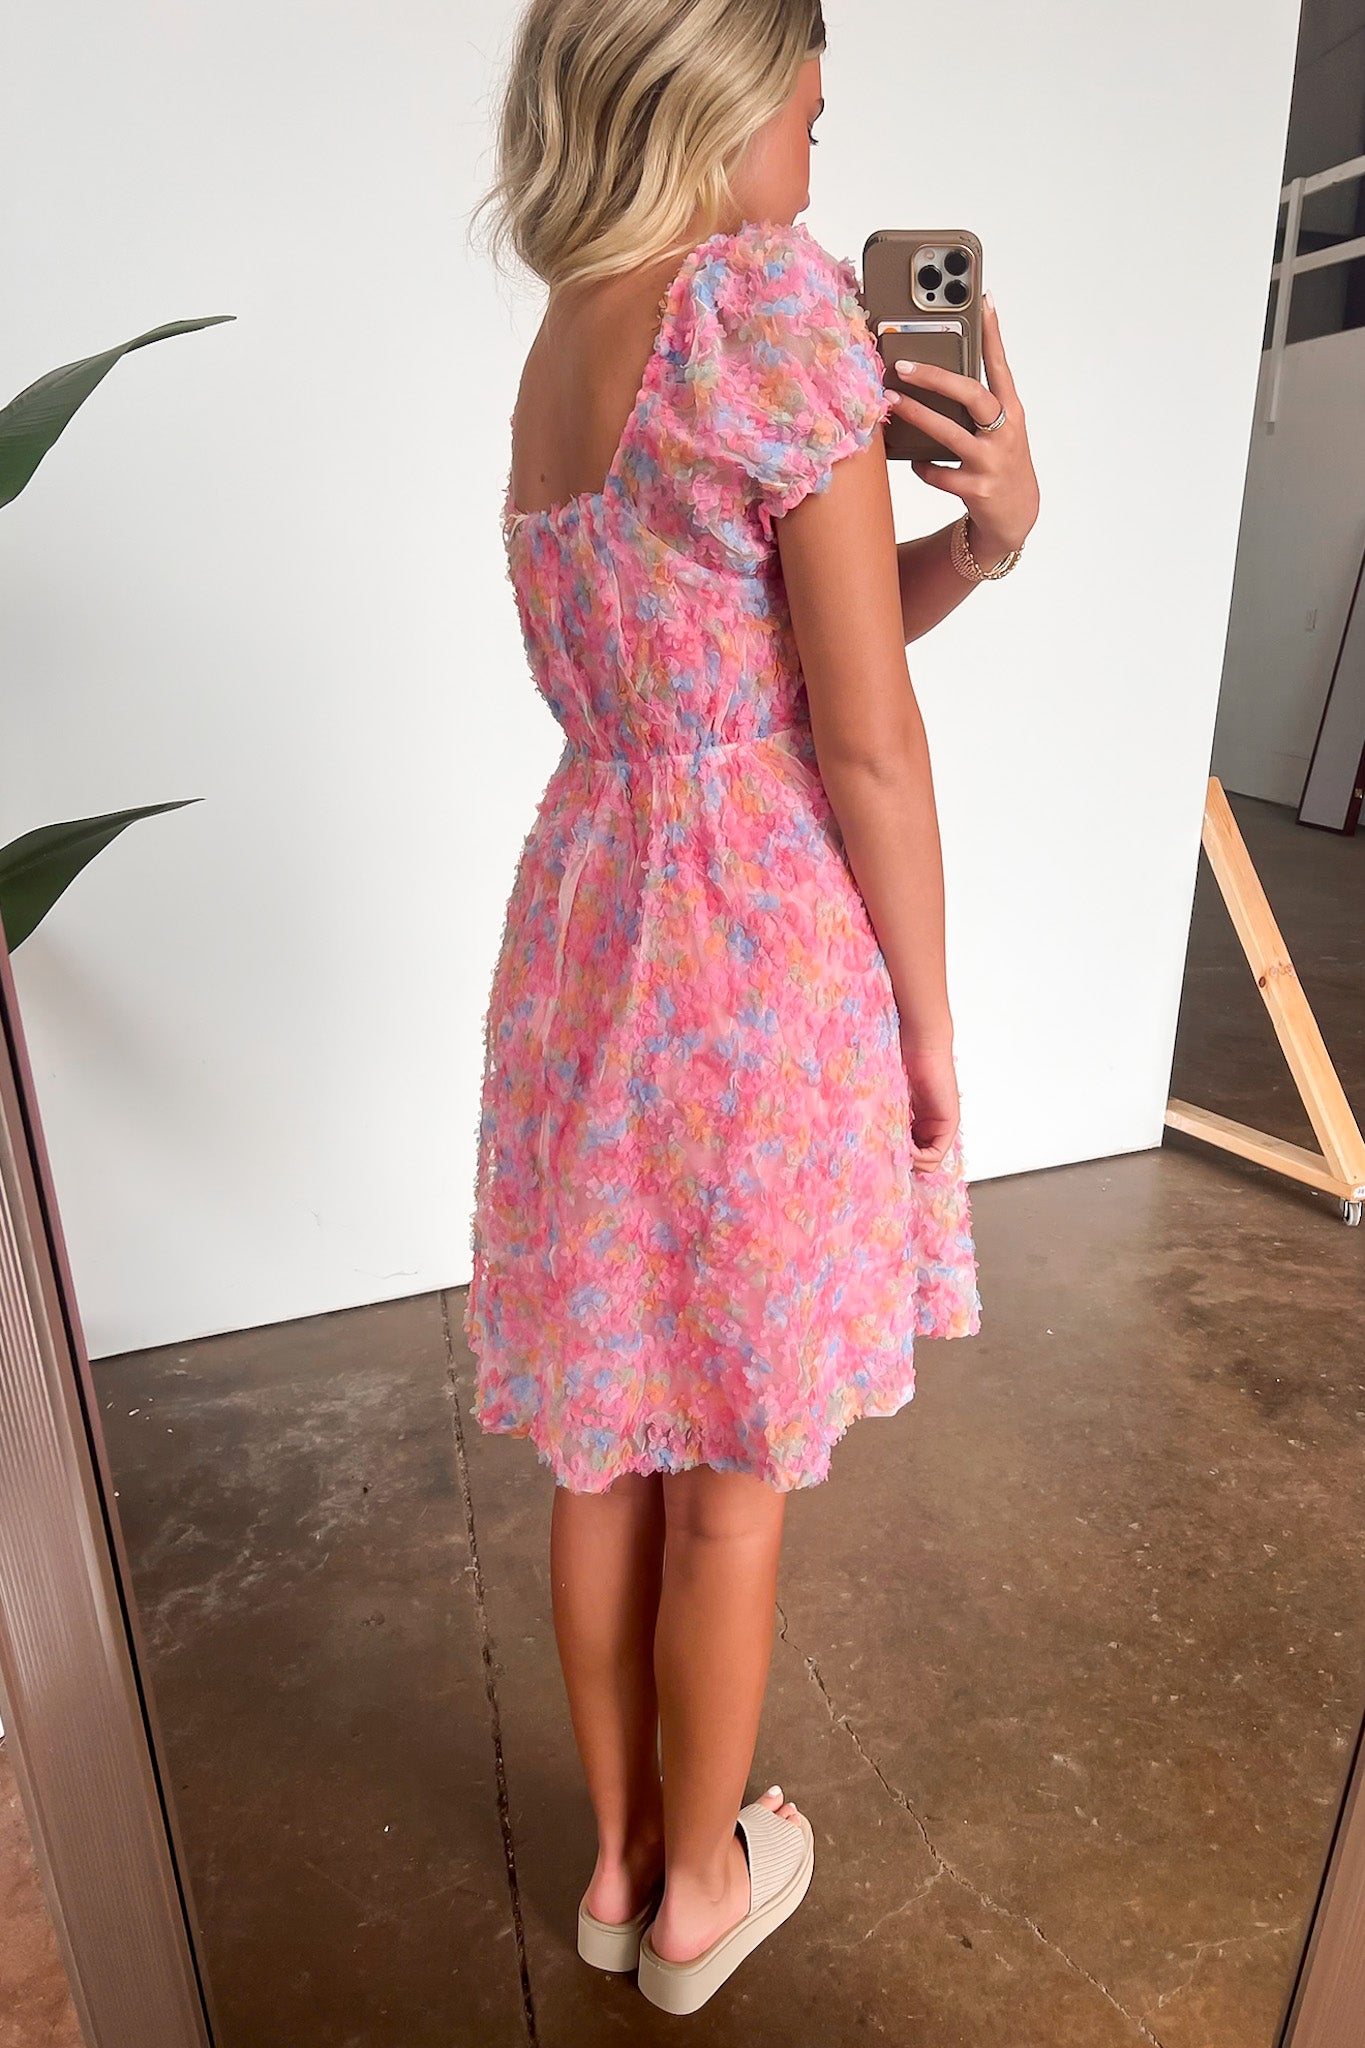  Compelling Charisma Textured Floral Dress - Madison and Mallory